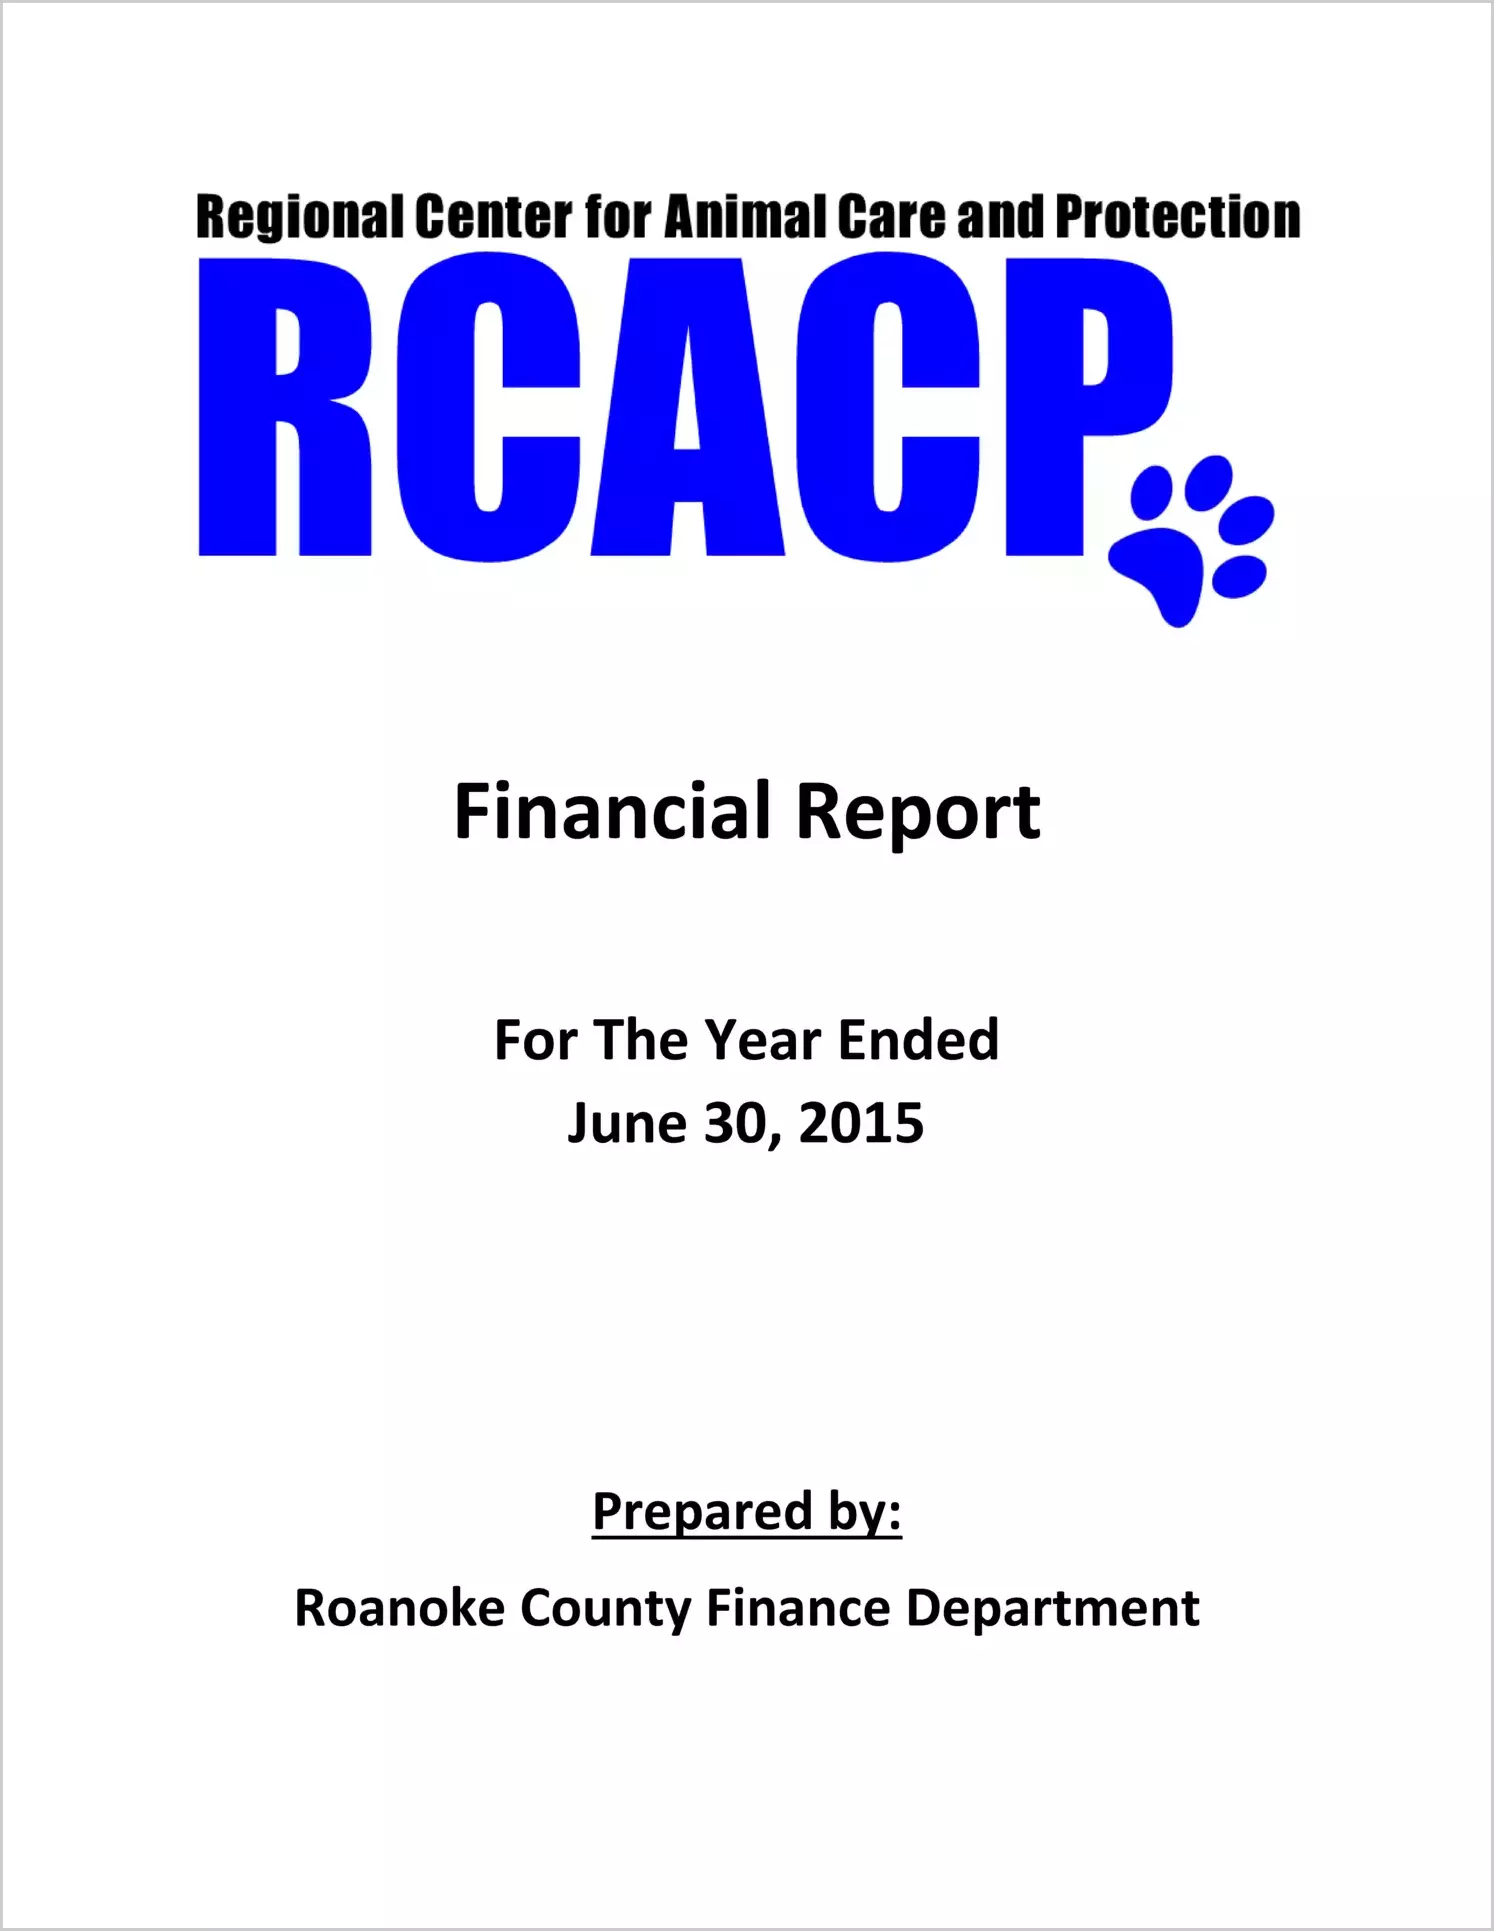 2015 Other Annual Financial Report for Regional Center for Animal Care and Protection